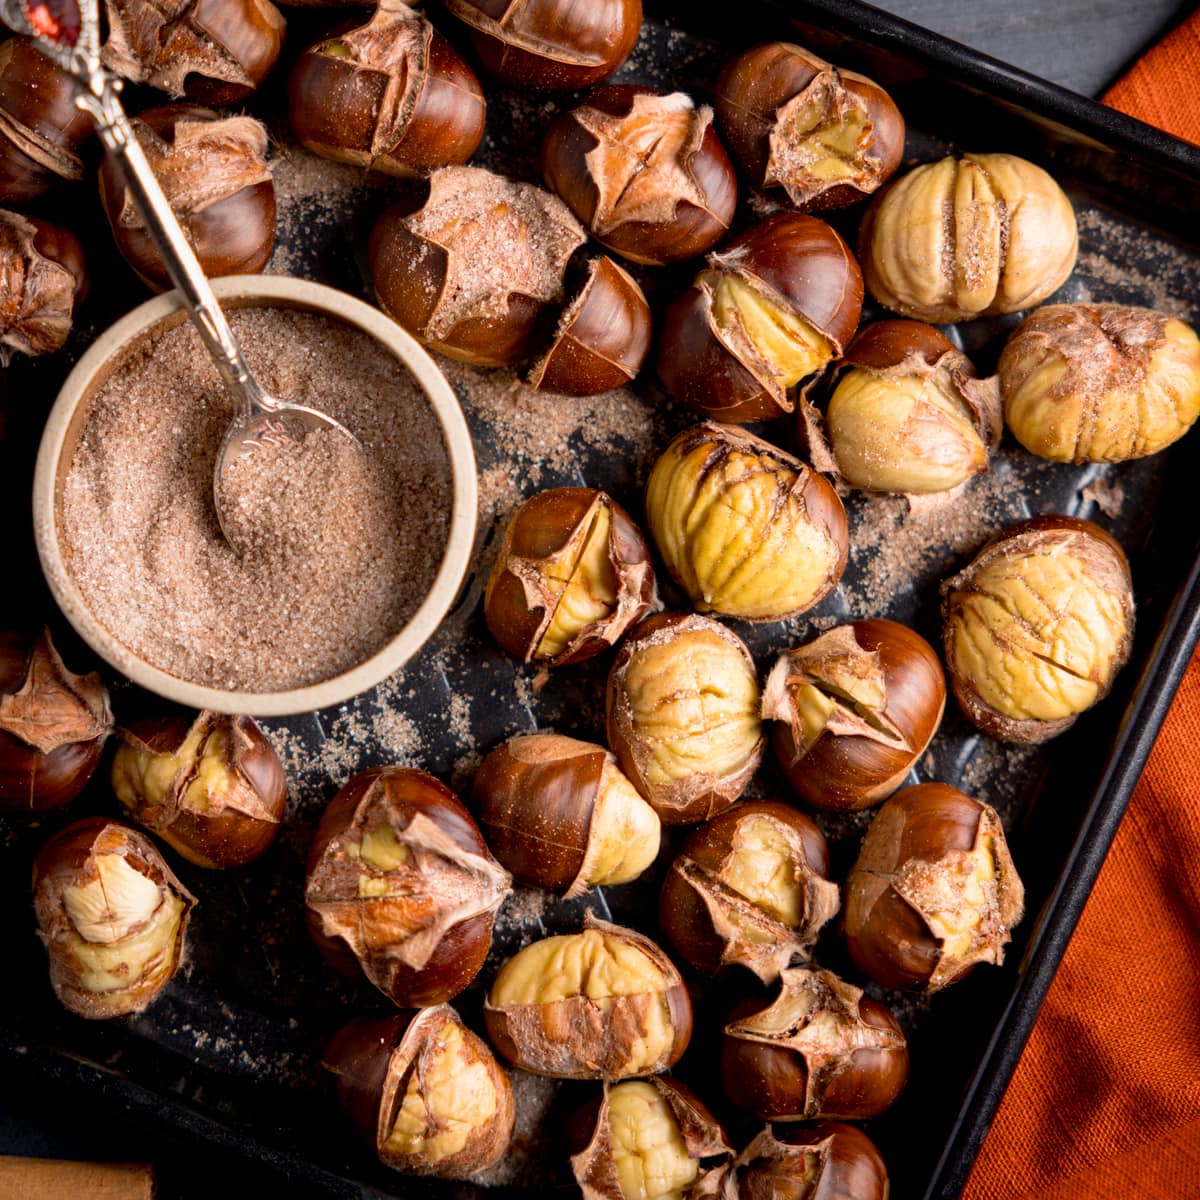 Roasted Chestnuts on a baking tray with a bowl of cinnamon sugar.